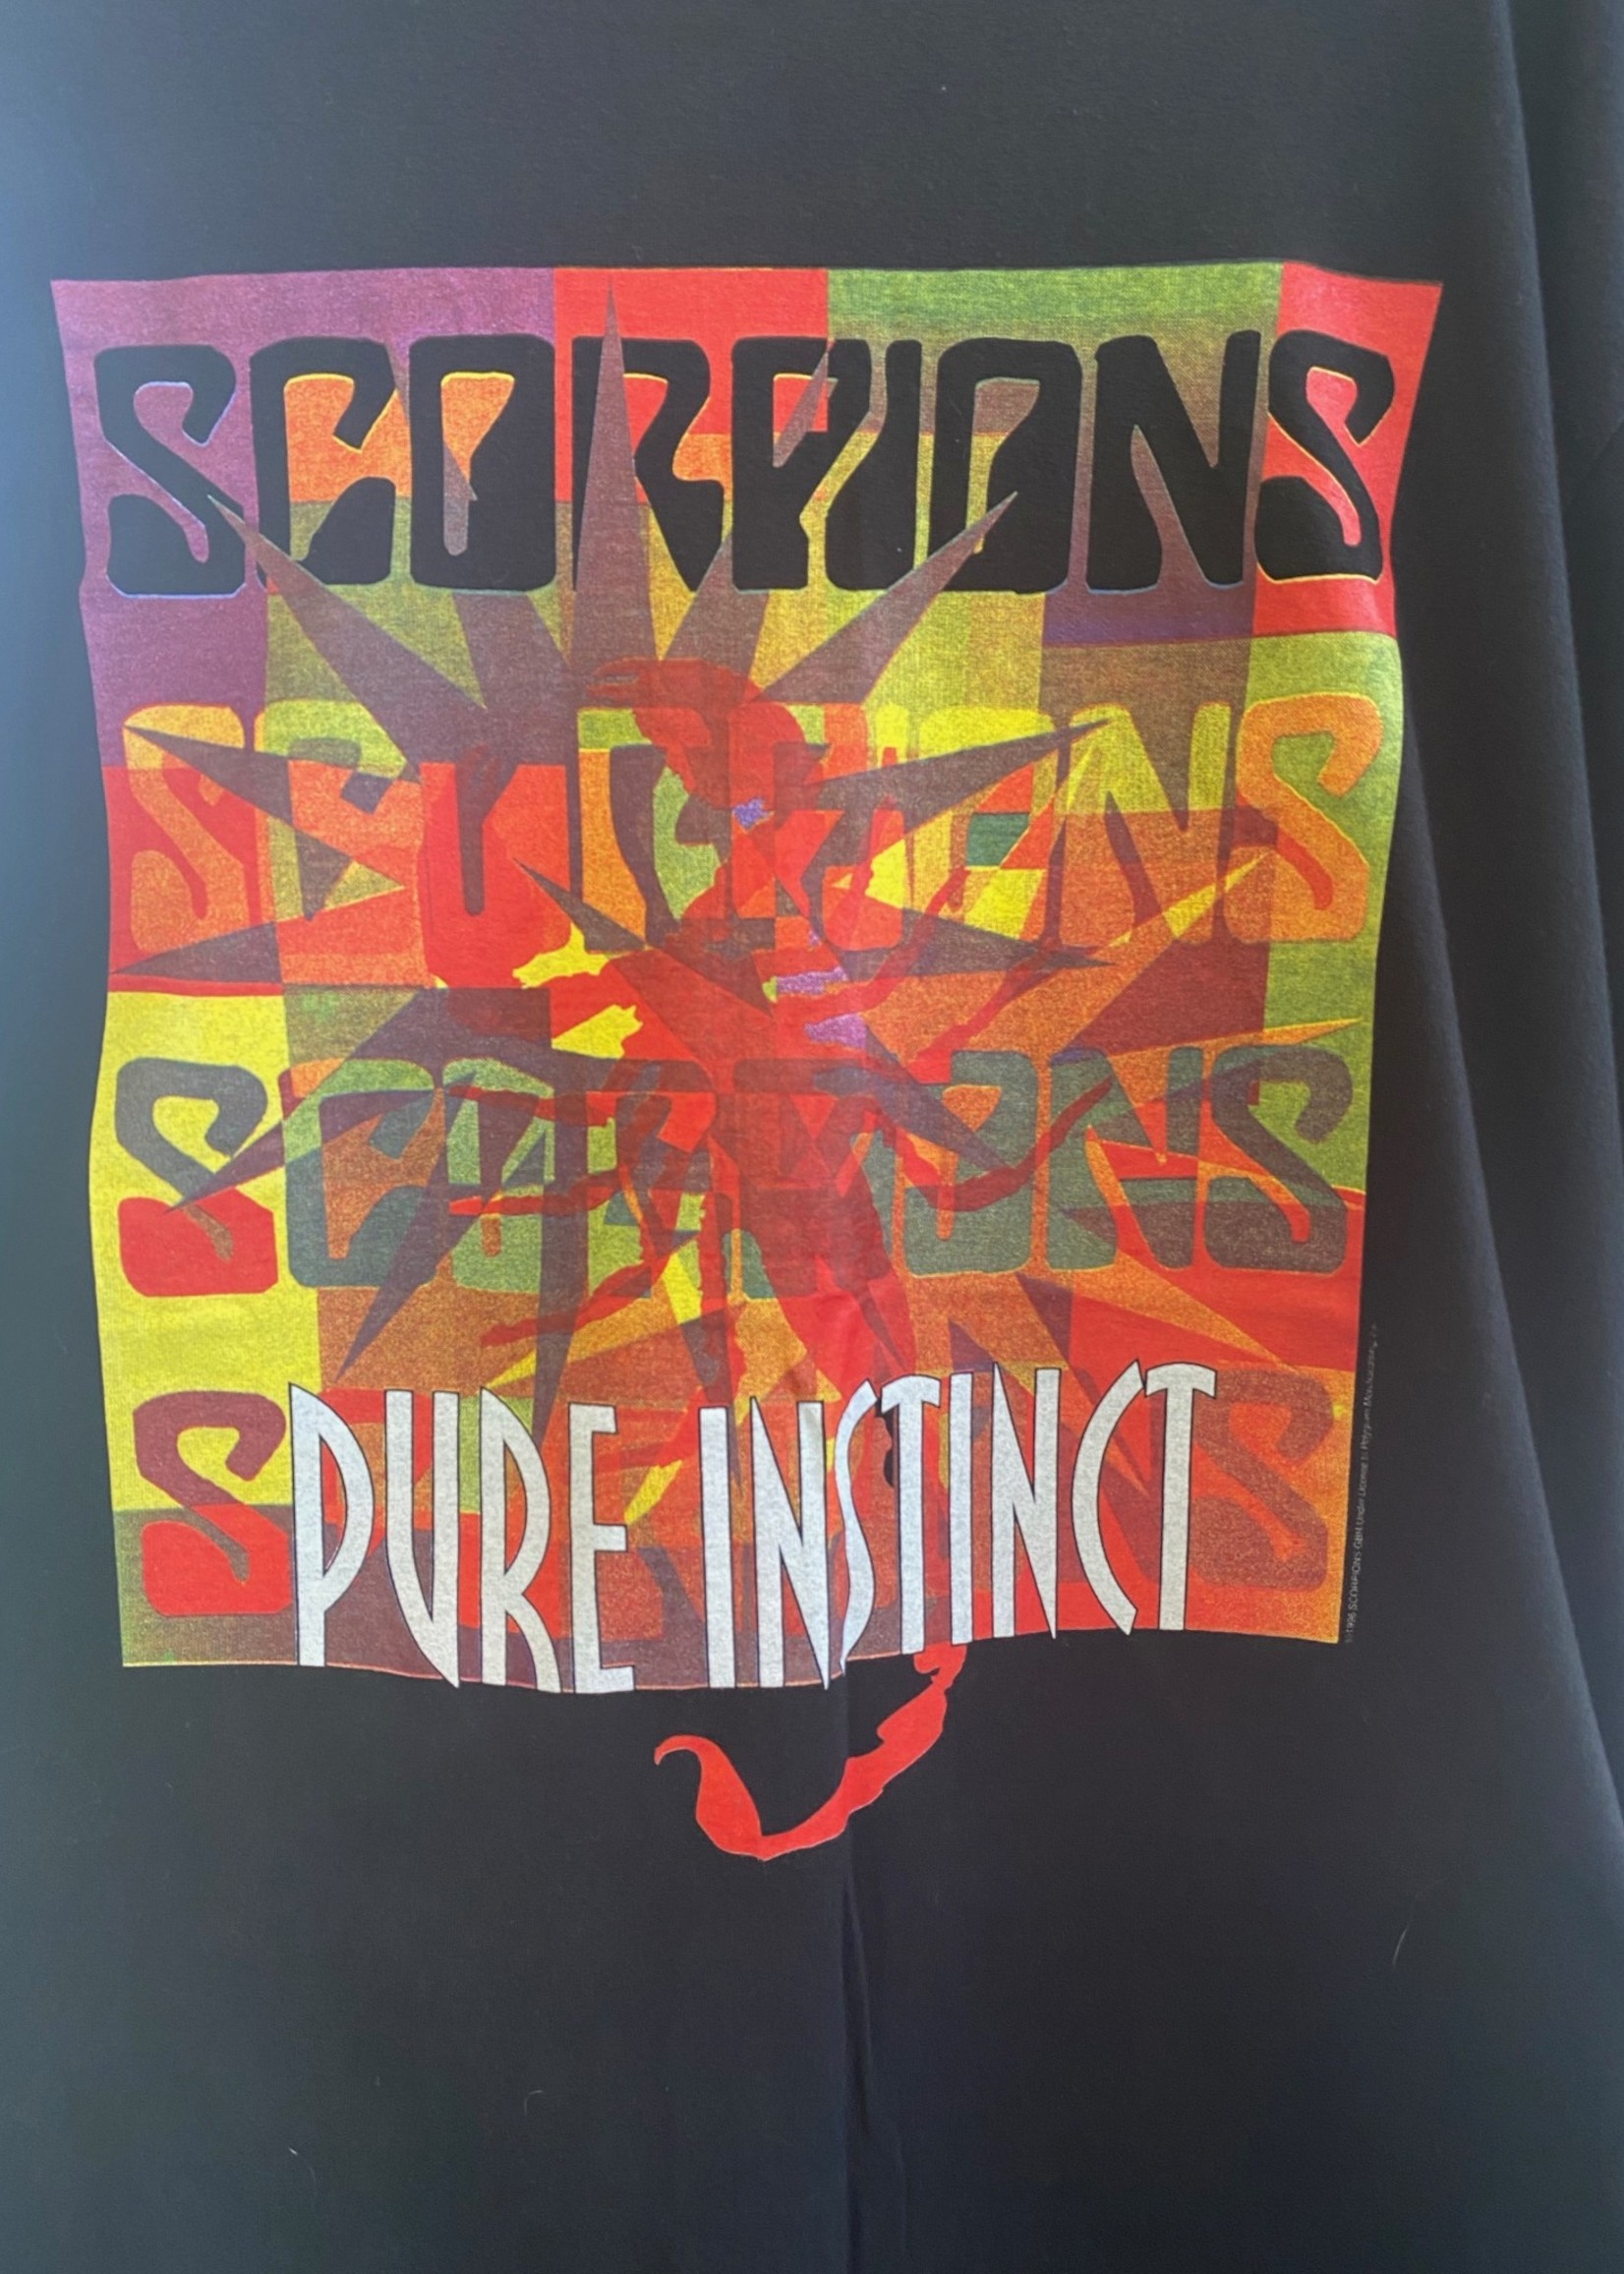 Vintage Scorpions Band Tee. Size XL.